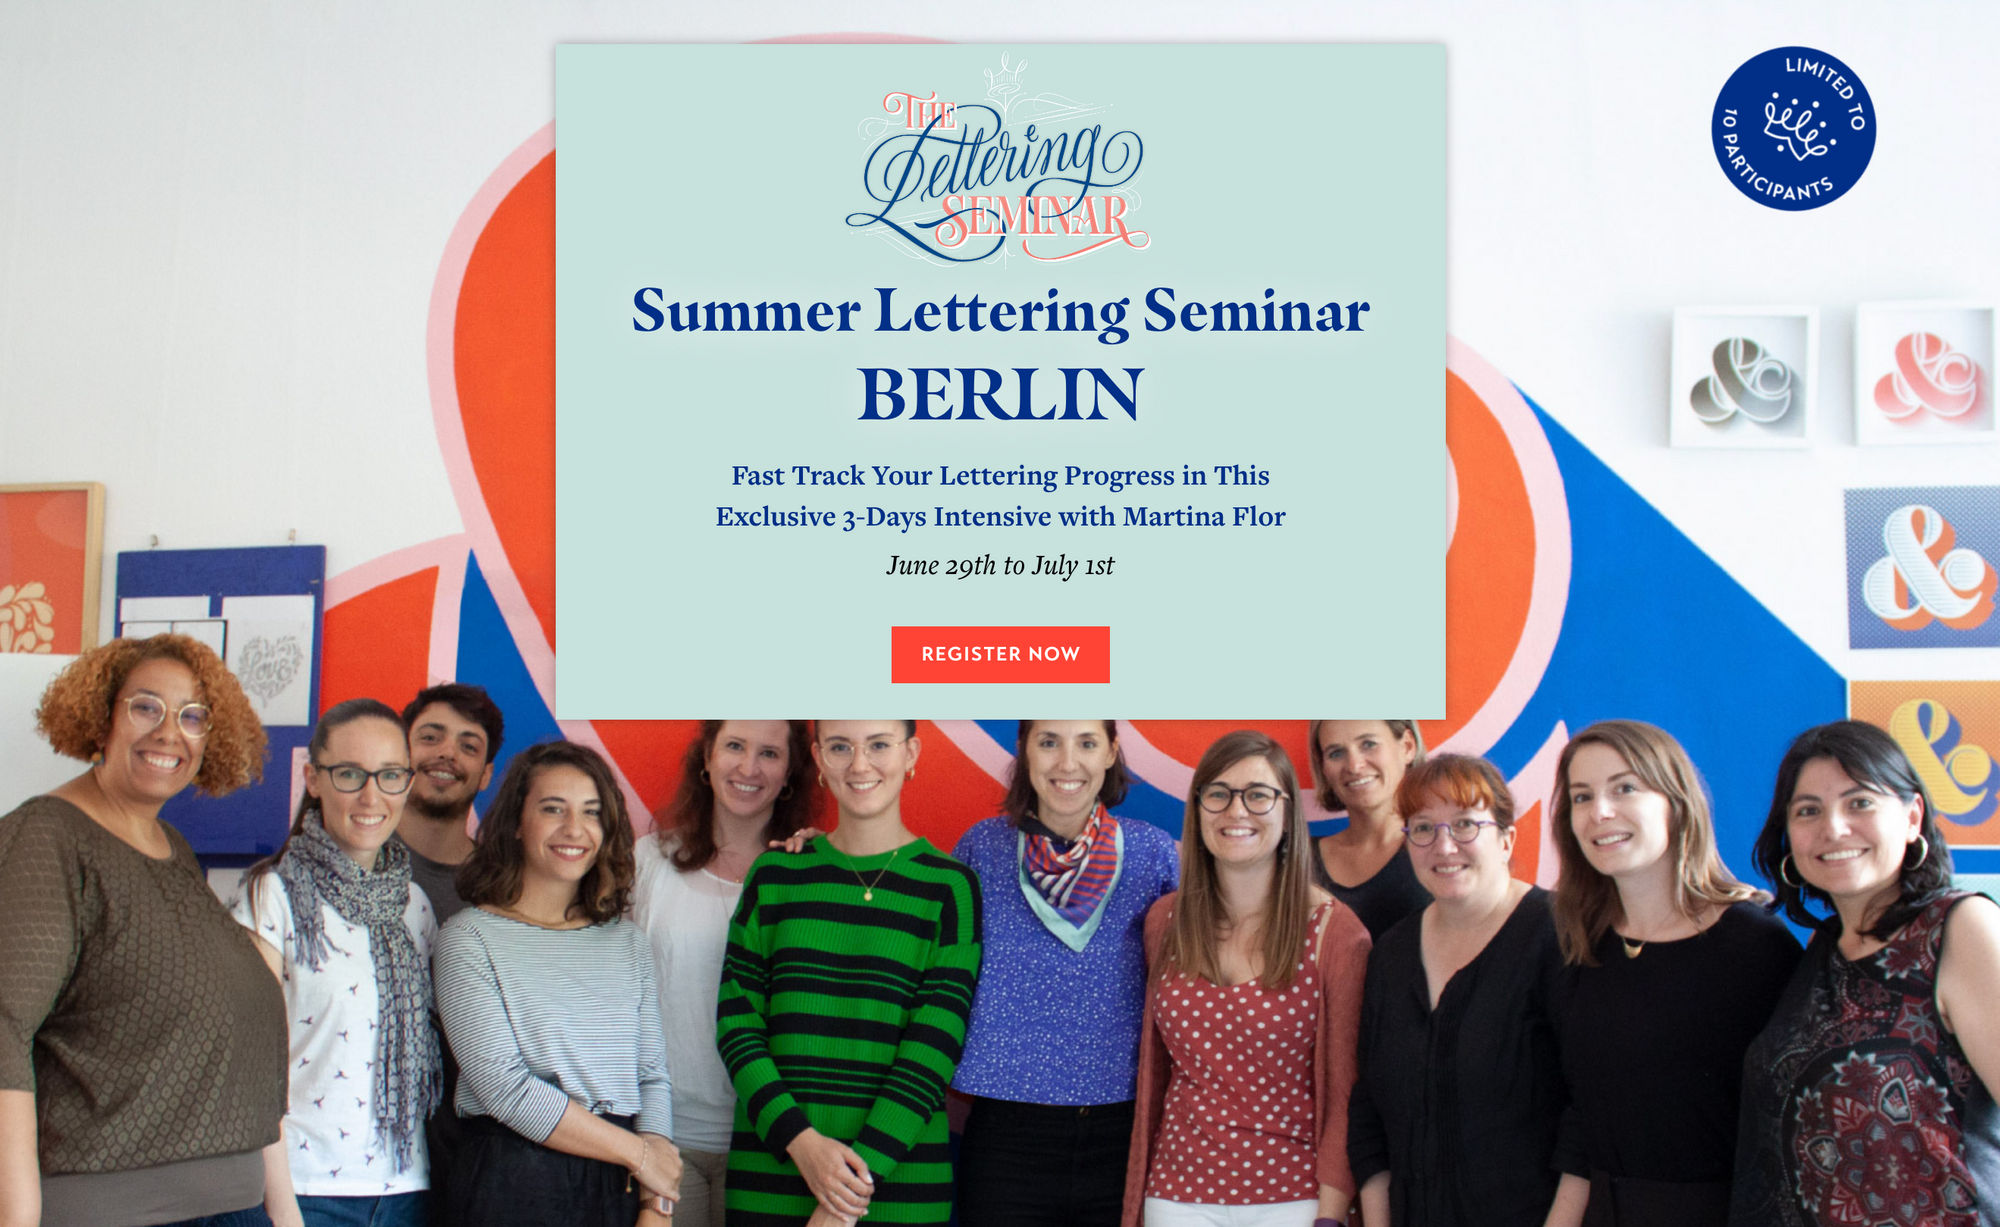 Promotional poster for a lettering seminar with a photo of people facing the camera and smiling.